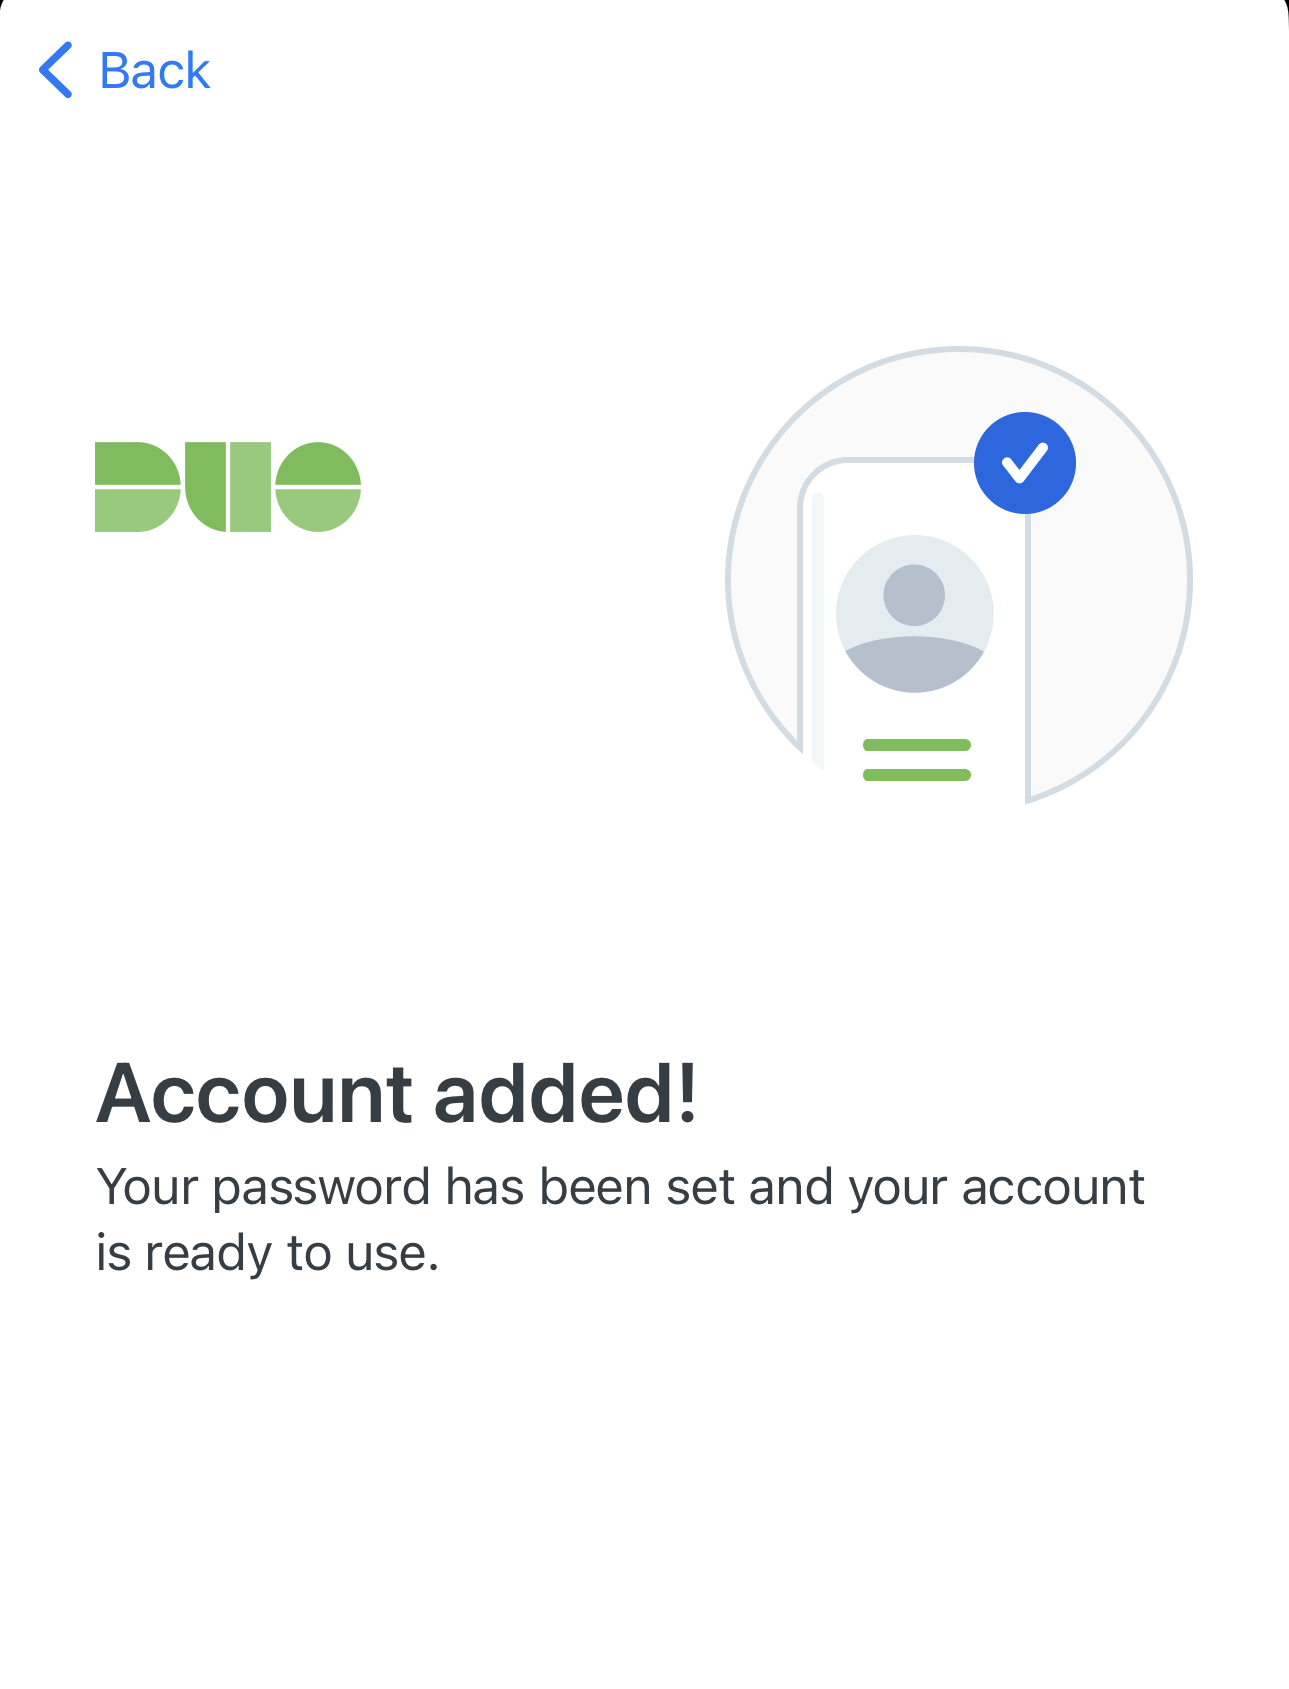 Duo mobile account added successfully